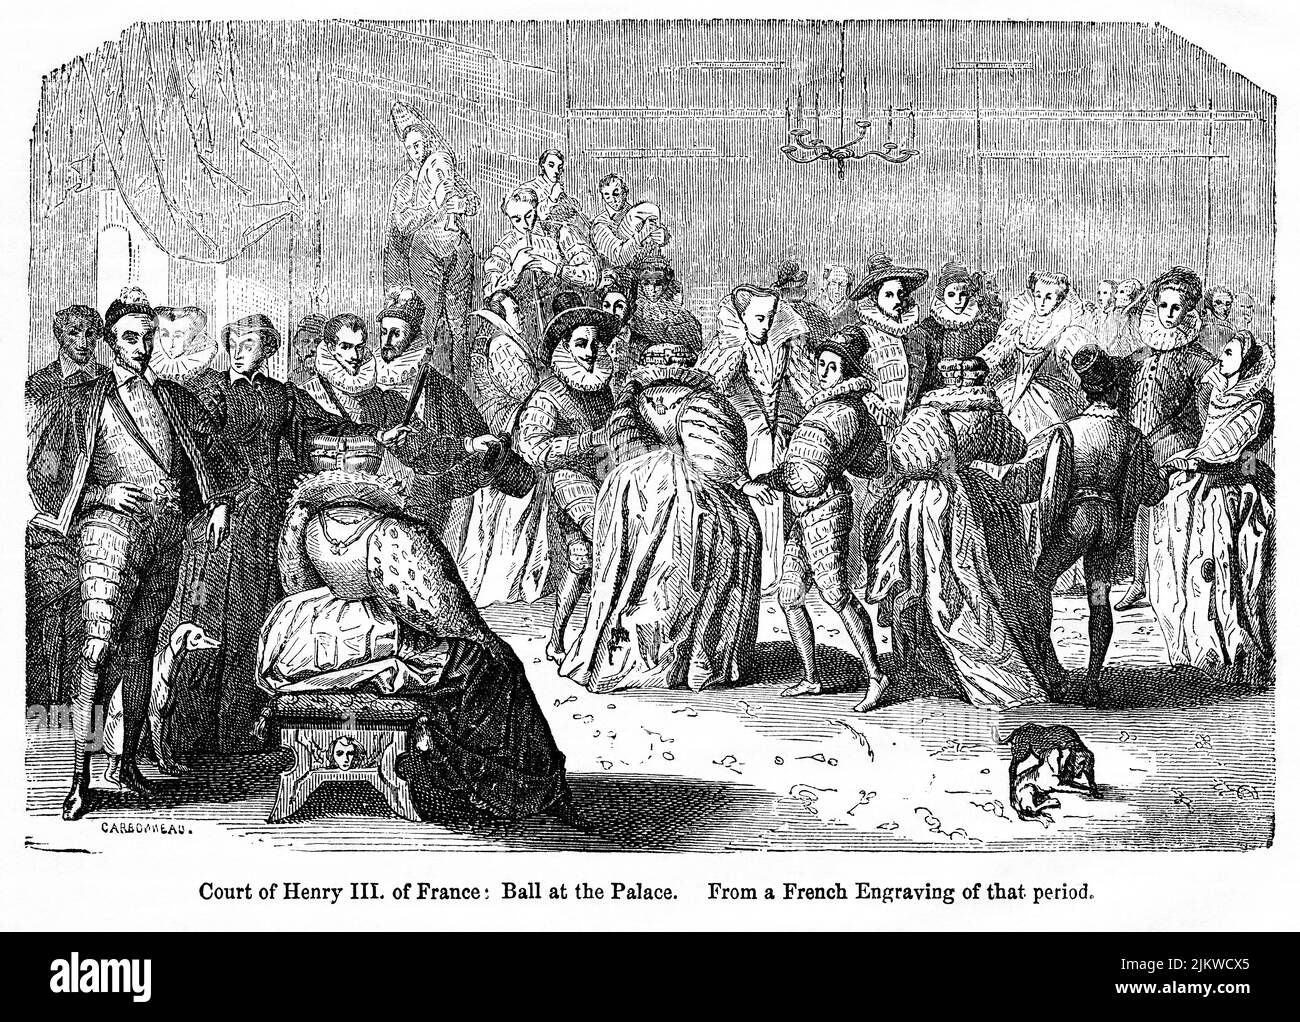 Court of Henry III of France, Ball at the Palace, Illustration from the Book, 'John Cassel’s Illustrated History of England, Volume II', text by William Howitt, Cassell, Petter, and Galpin, London, 1858 Stock Photo